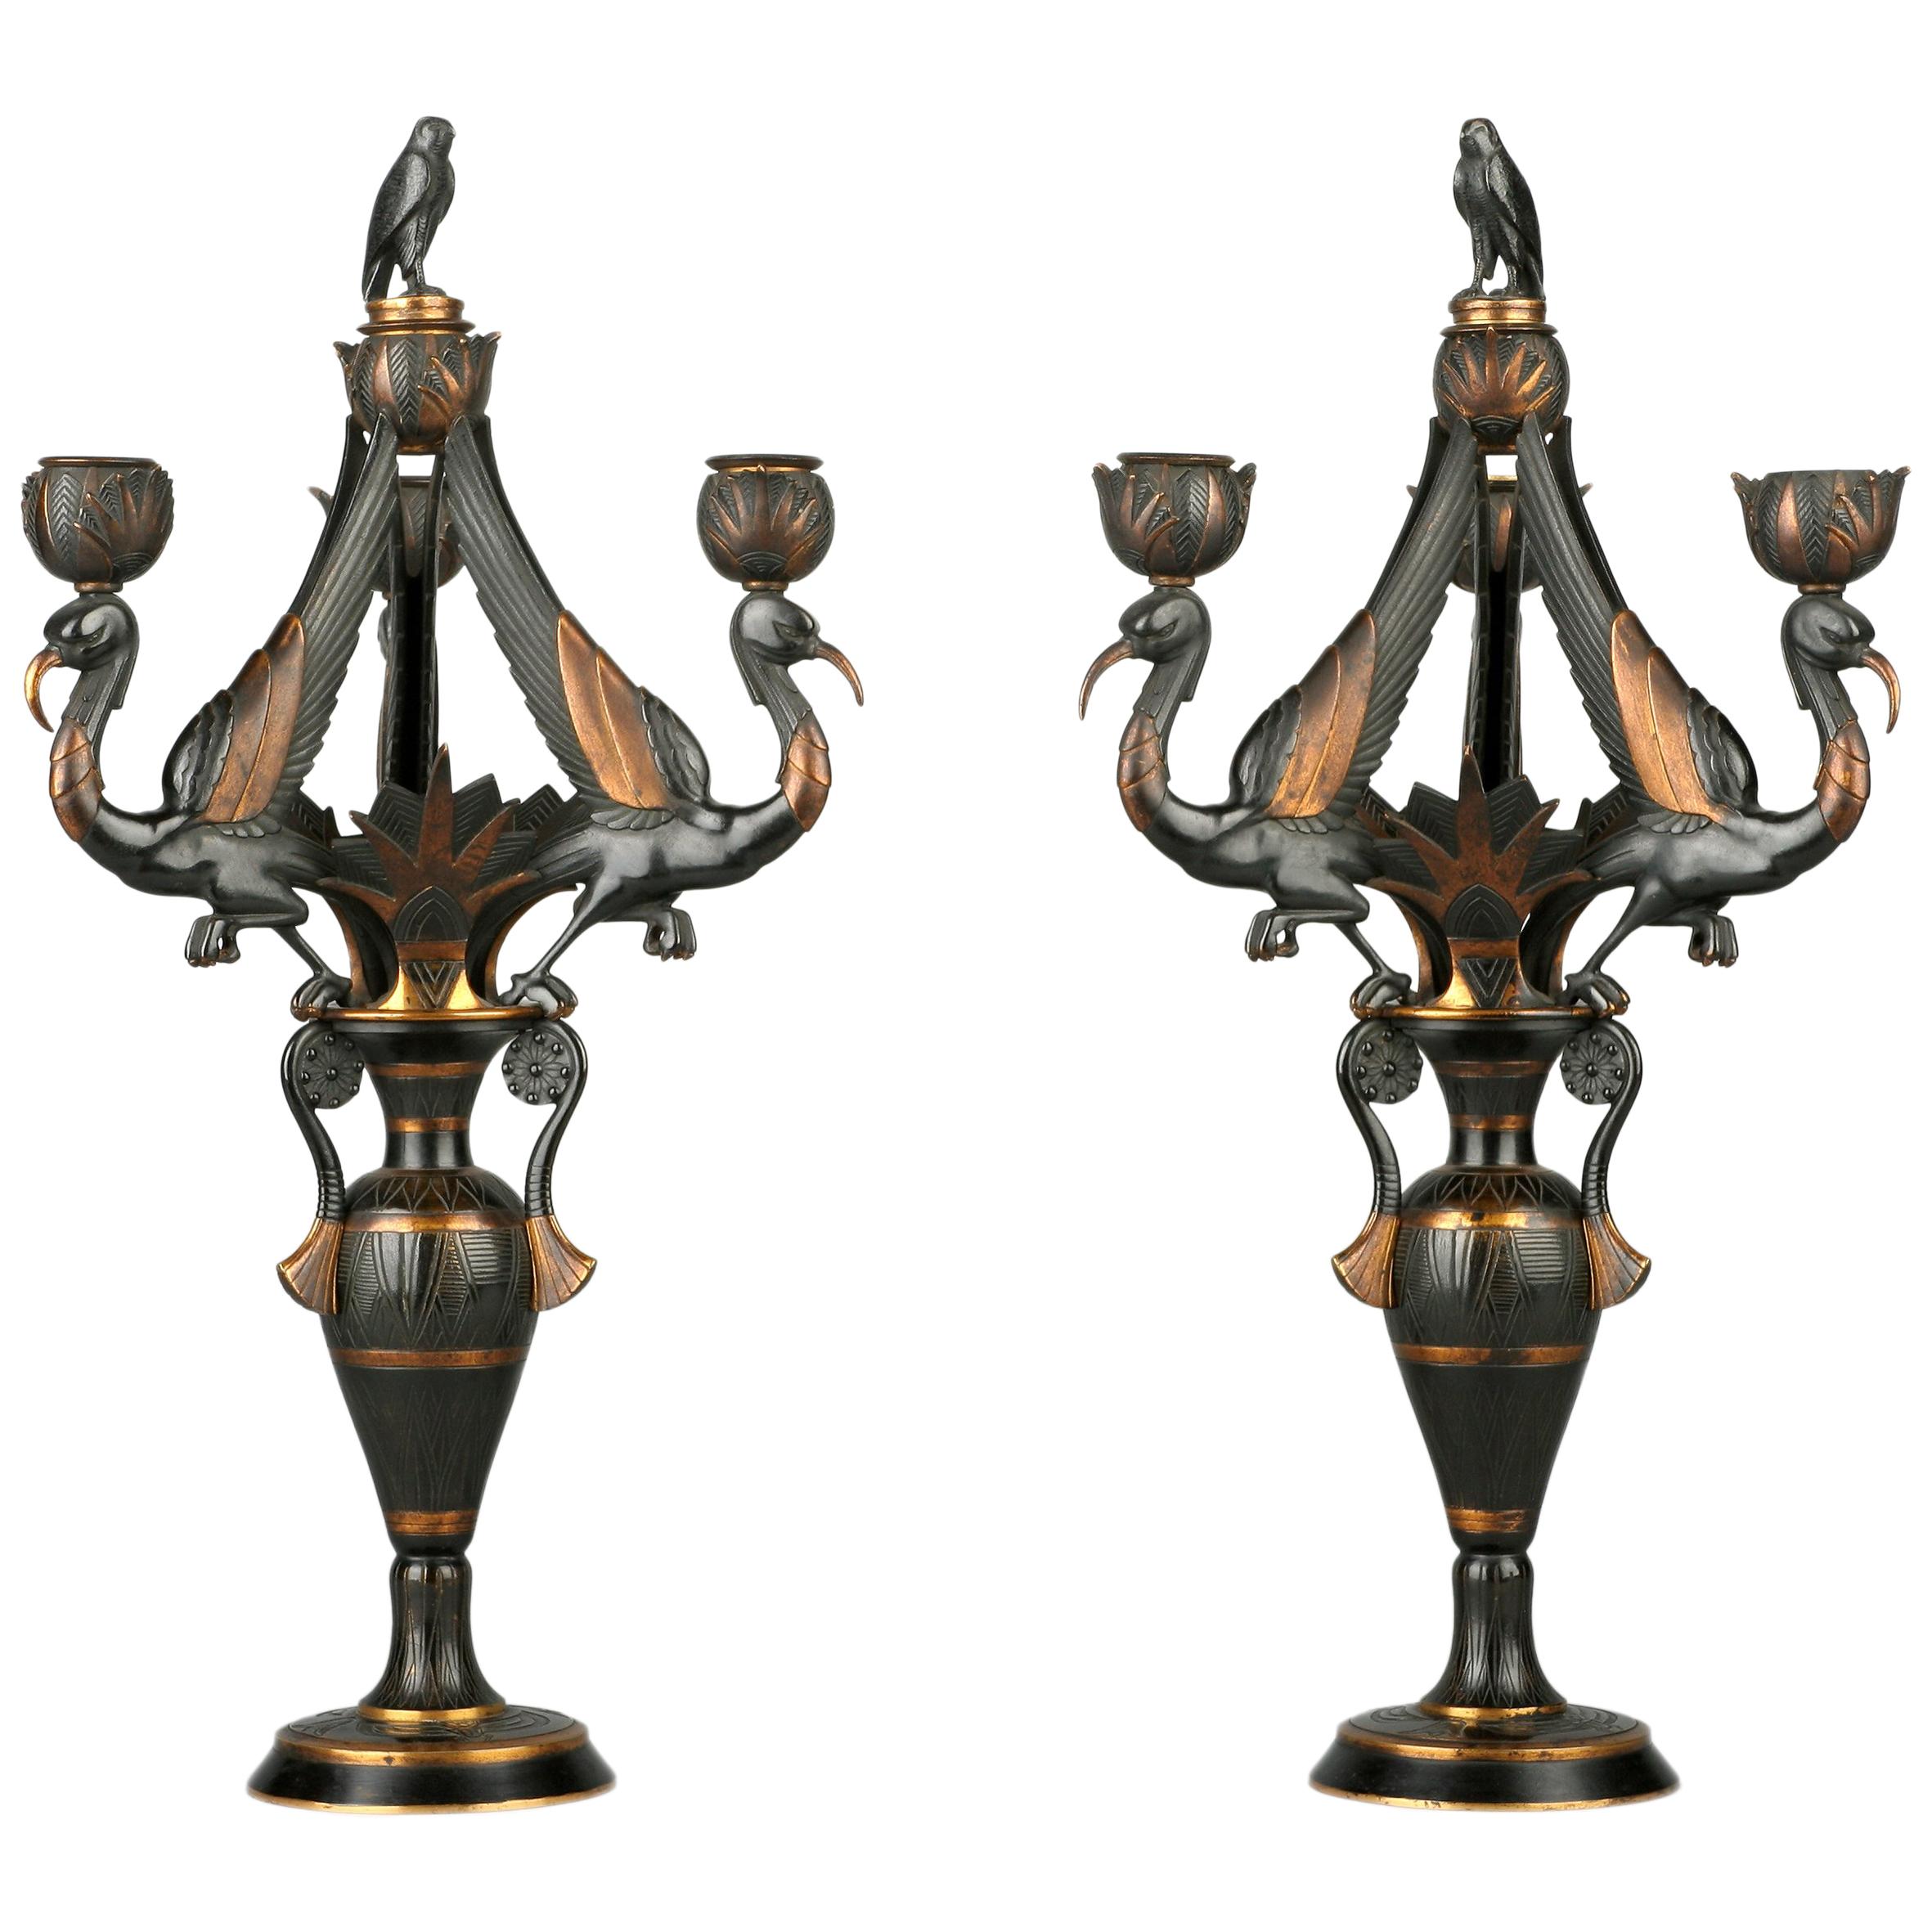 Pair of Neo-Egyptian Candelabras Attributed to G. Servant, France, Circa 1870